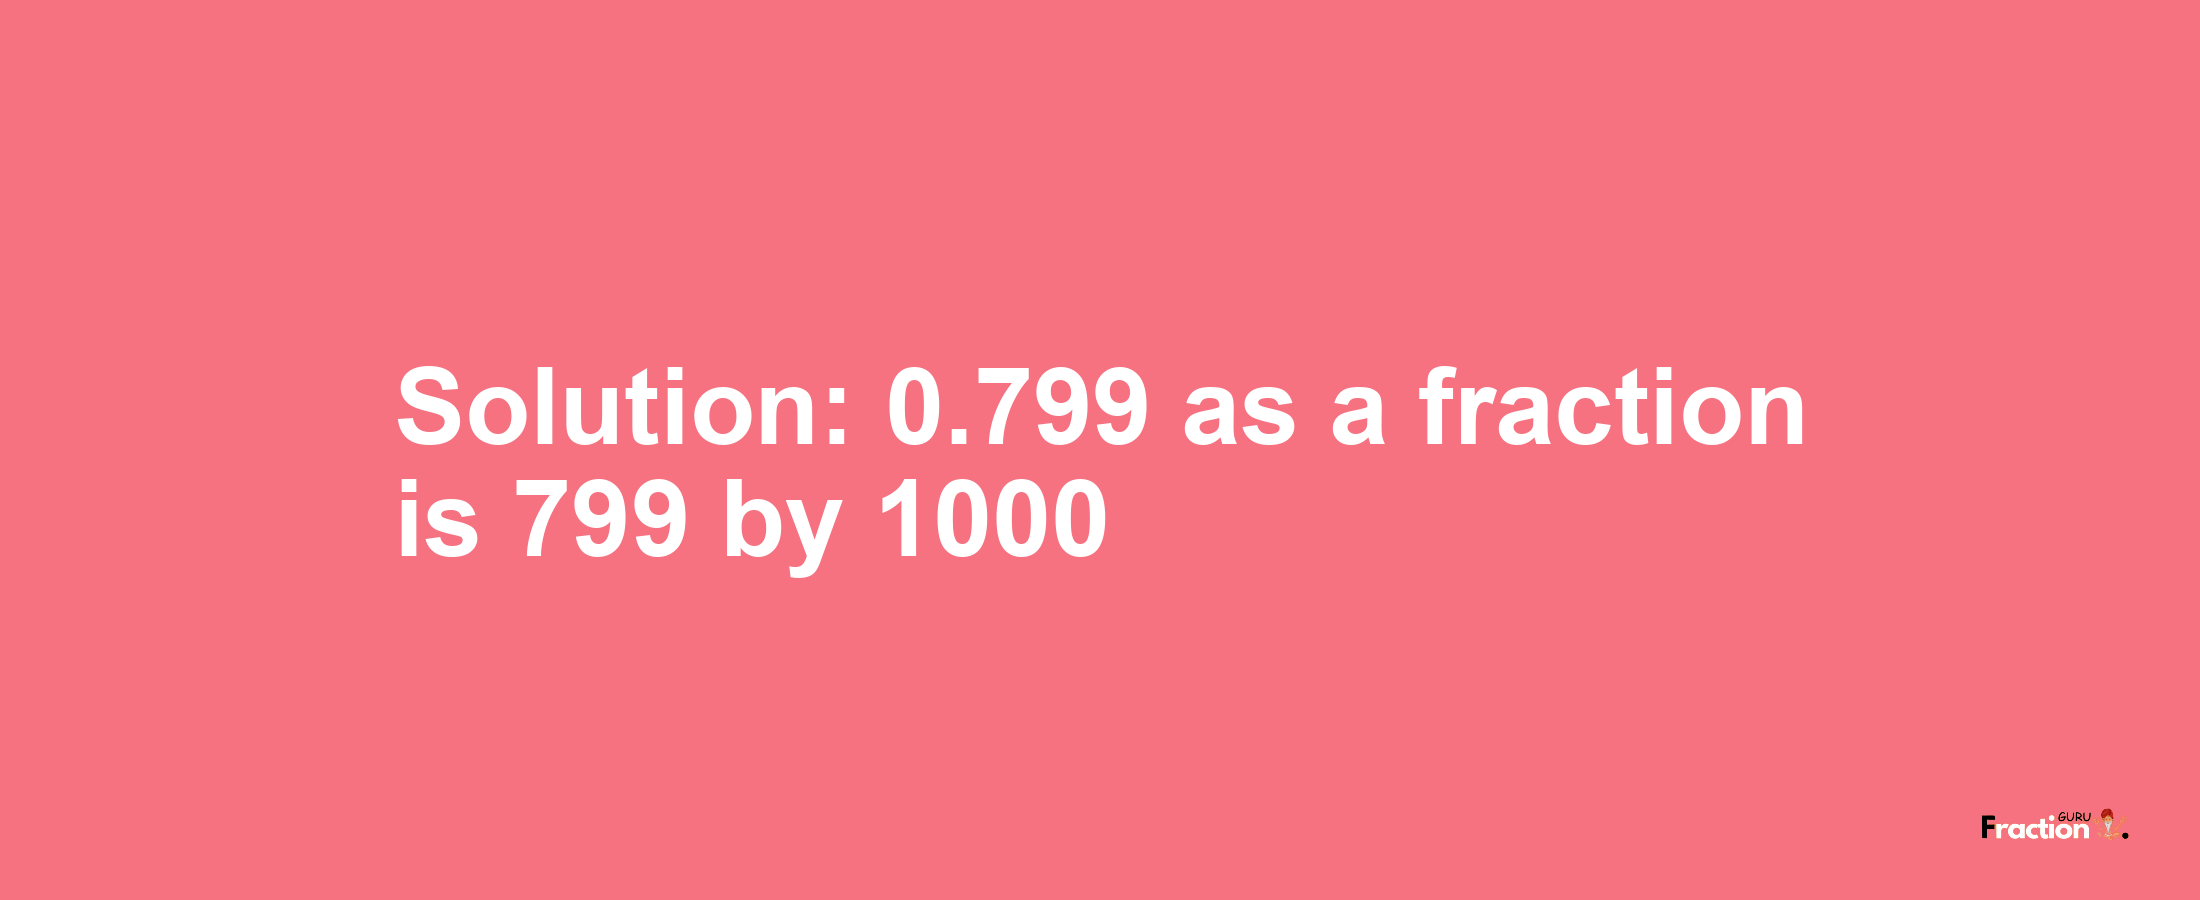 Solution:0.799 as a fraction is 799/1000